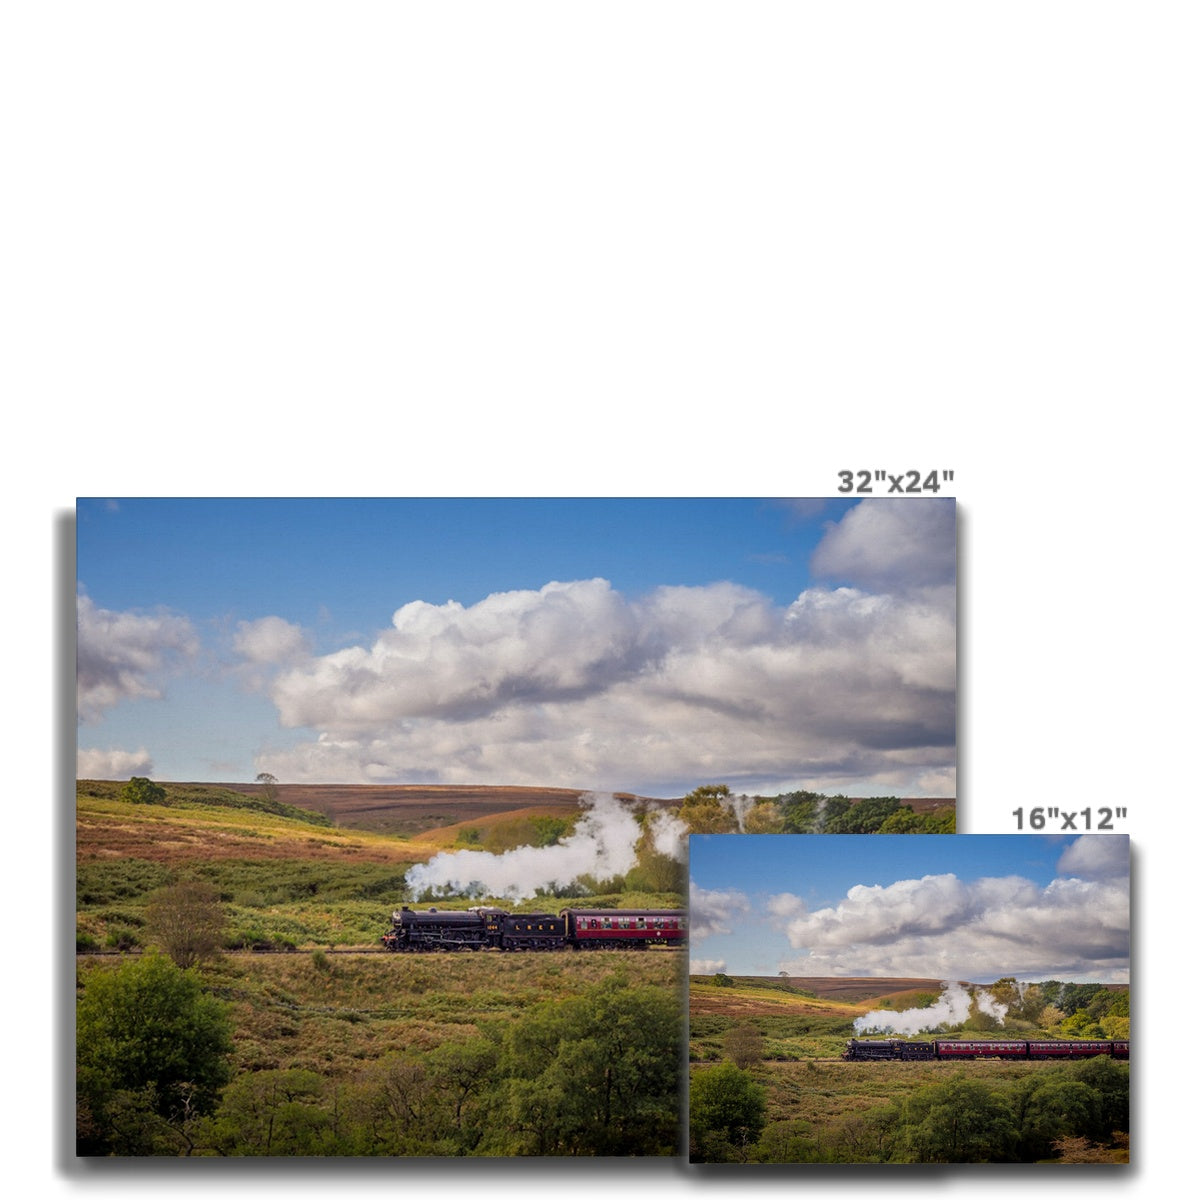 Steam Train: LNER Thompson Class B1 No. 1264  on the North Yorkshire Moors in summer. UK Canvas